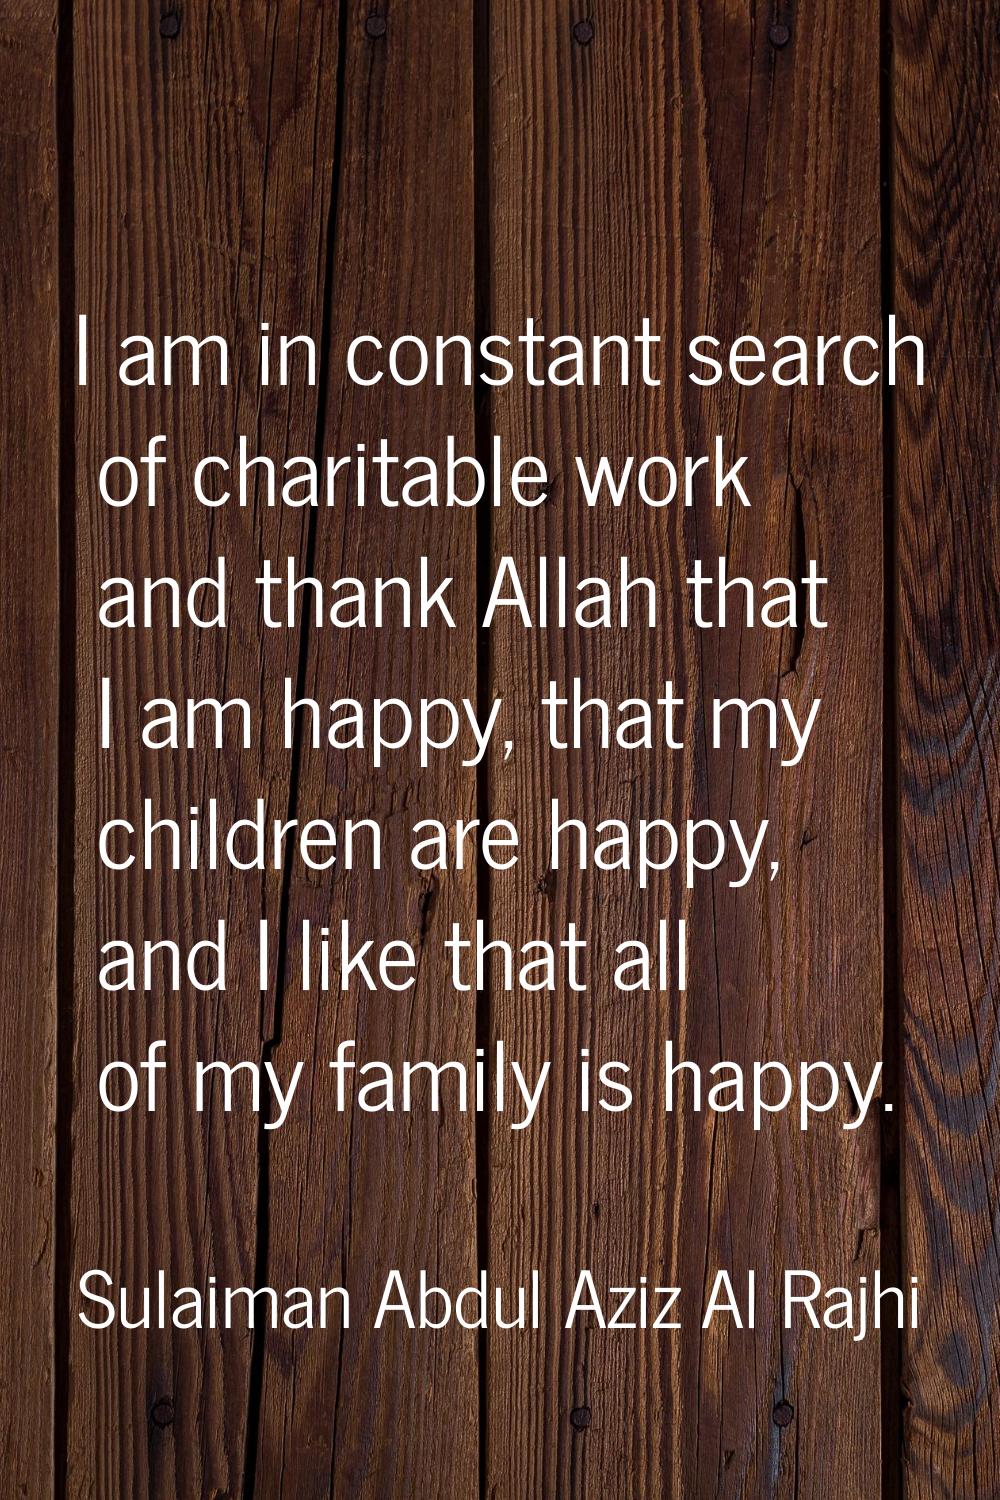 I am in constant search of charitable work and thank Allah that I am happy, that my children are ha